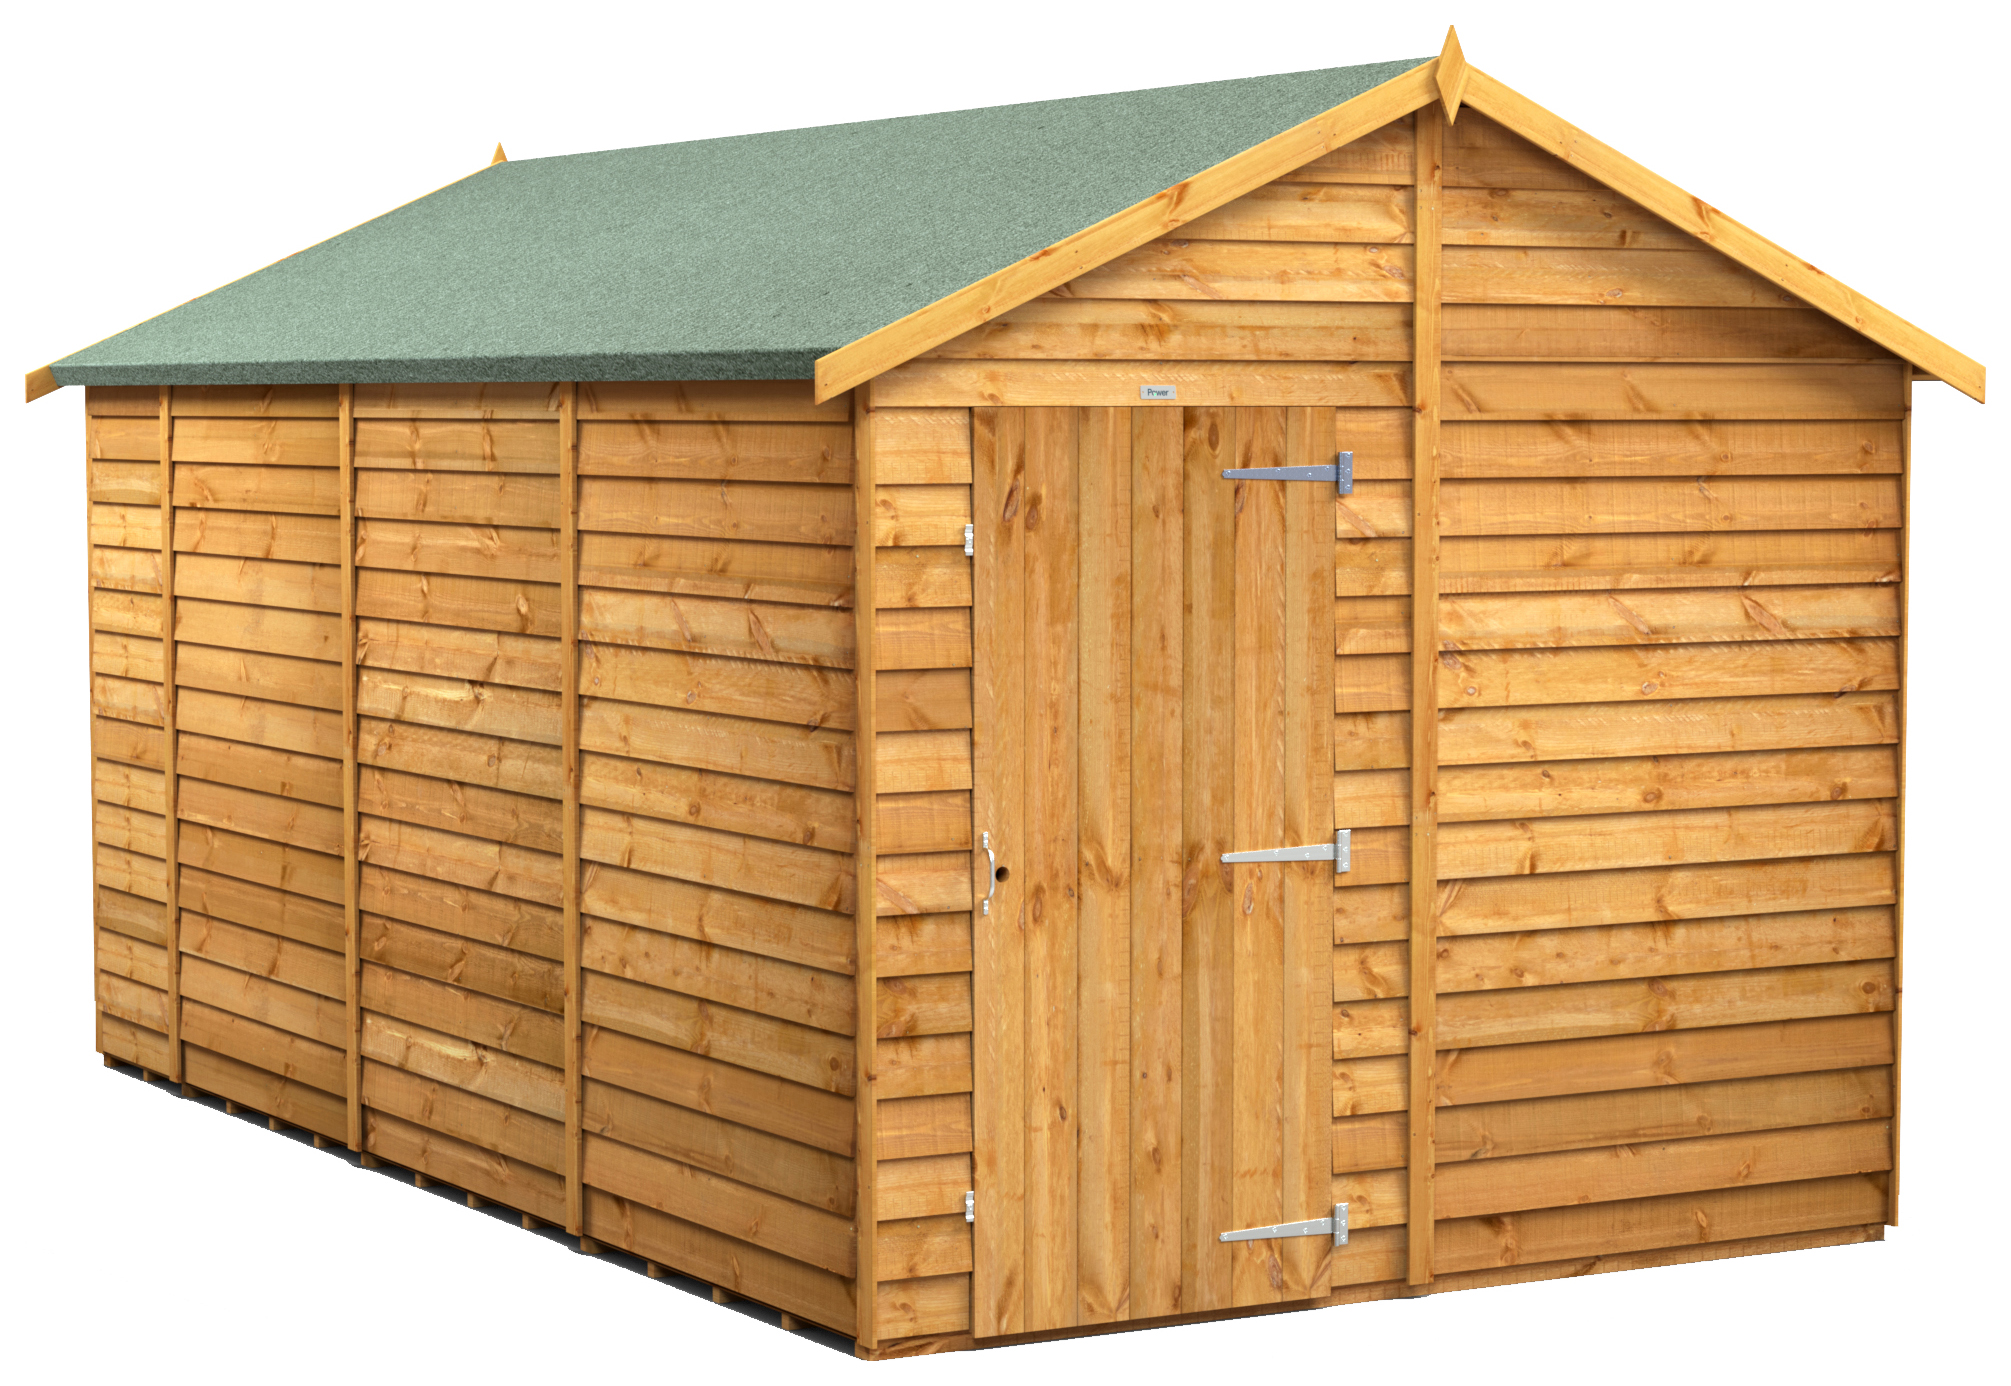 Power Sheds 14 x 8ft Apex Overlap Dip Treated Windowless Shed